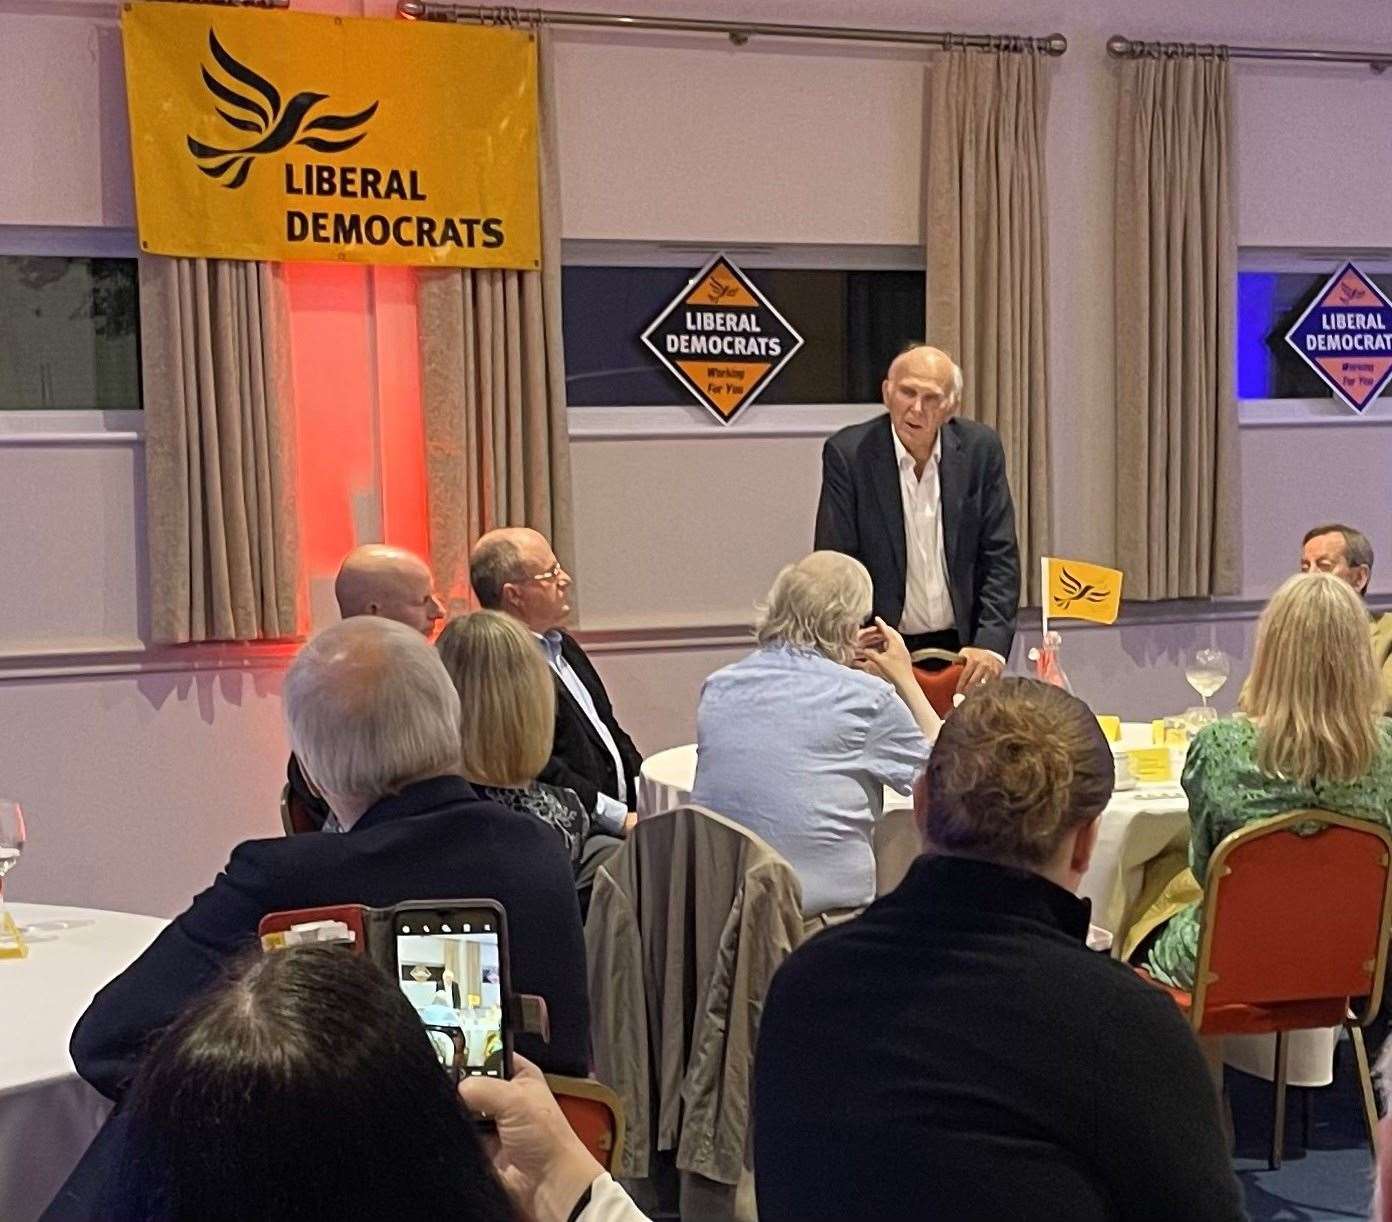 Sir Vince Cable addressing the meeting